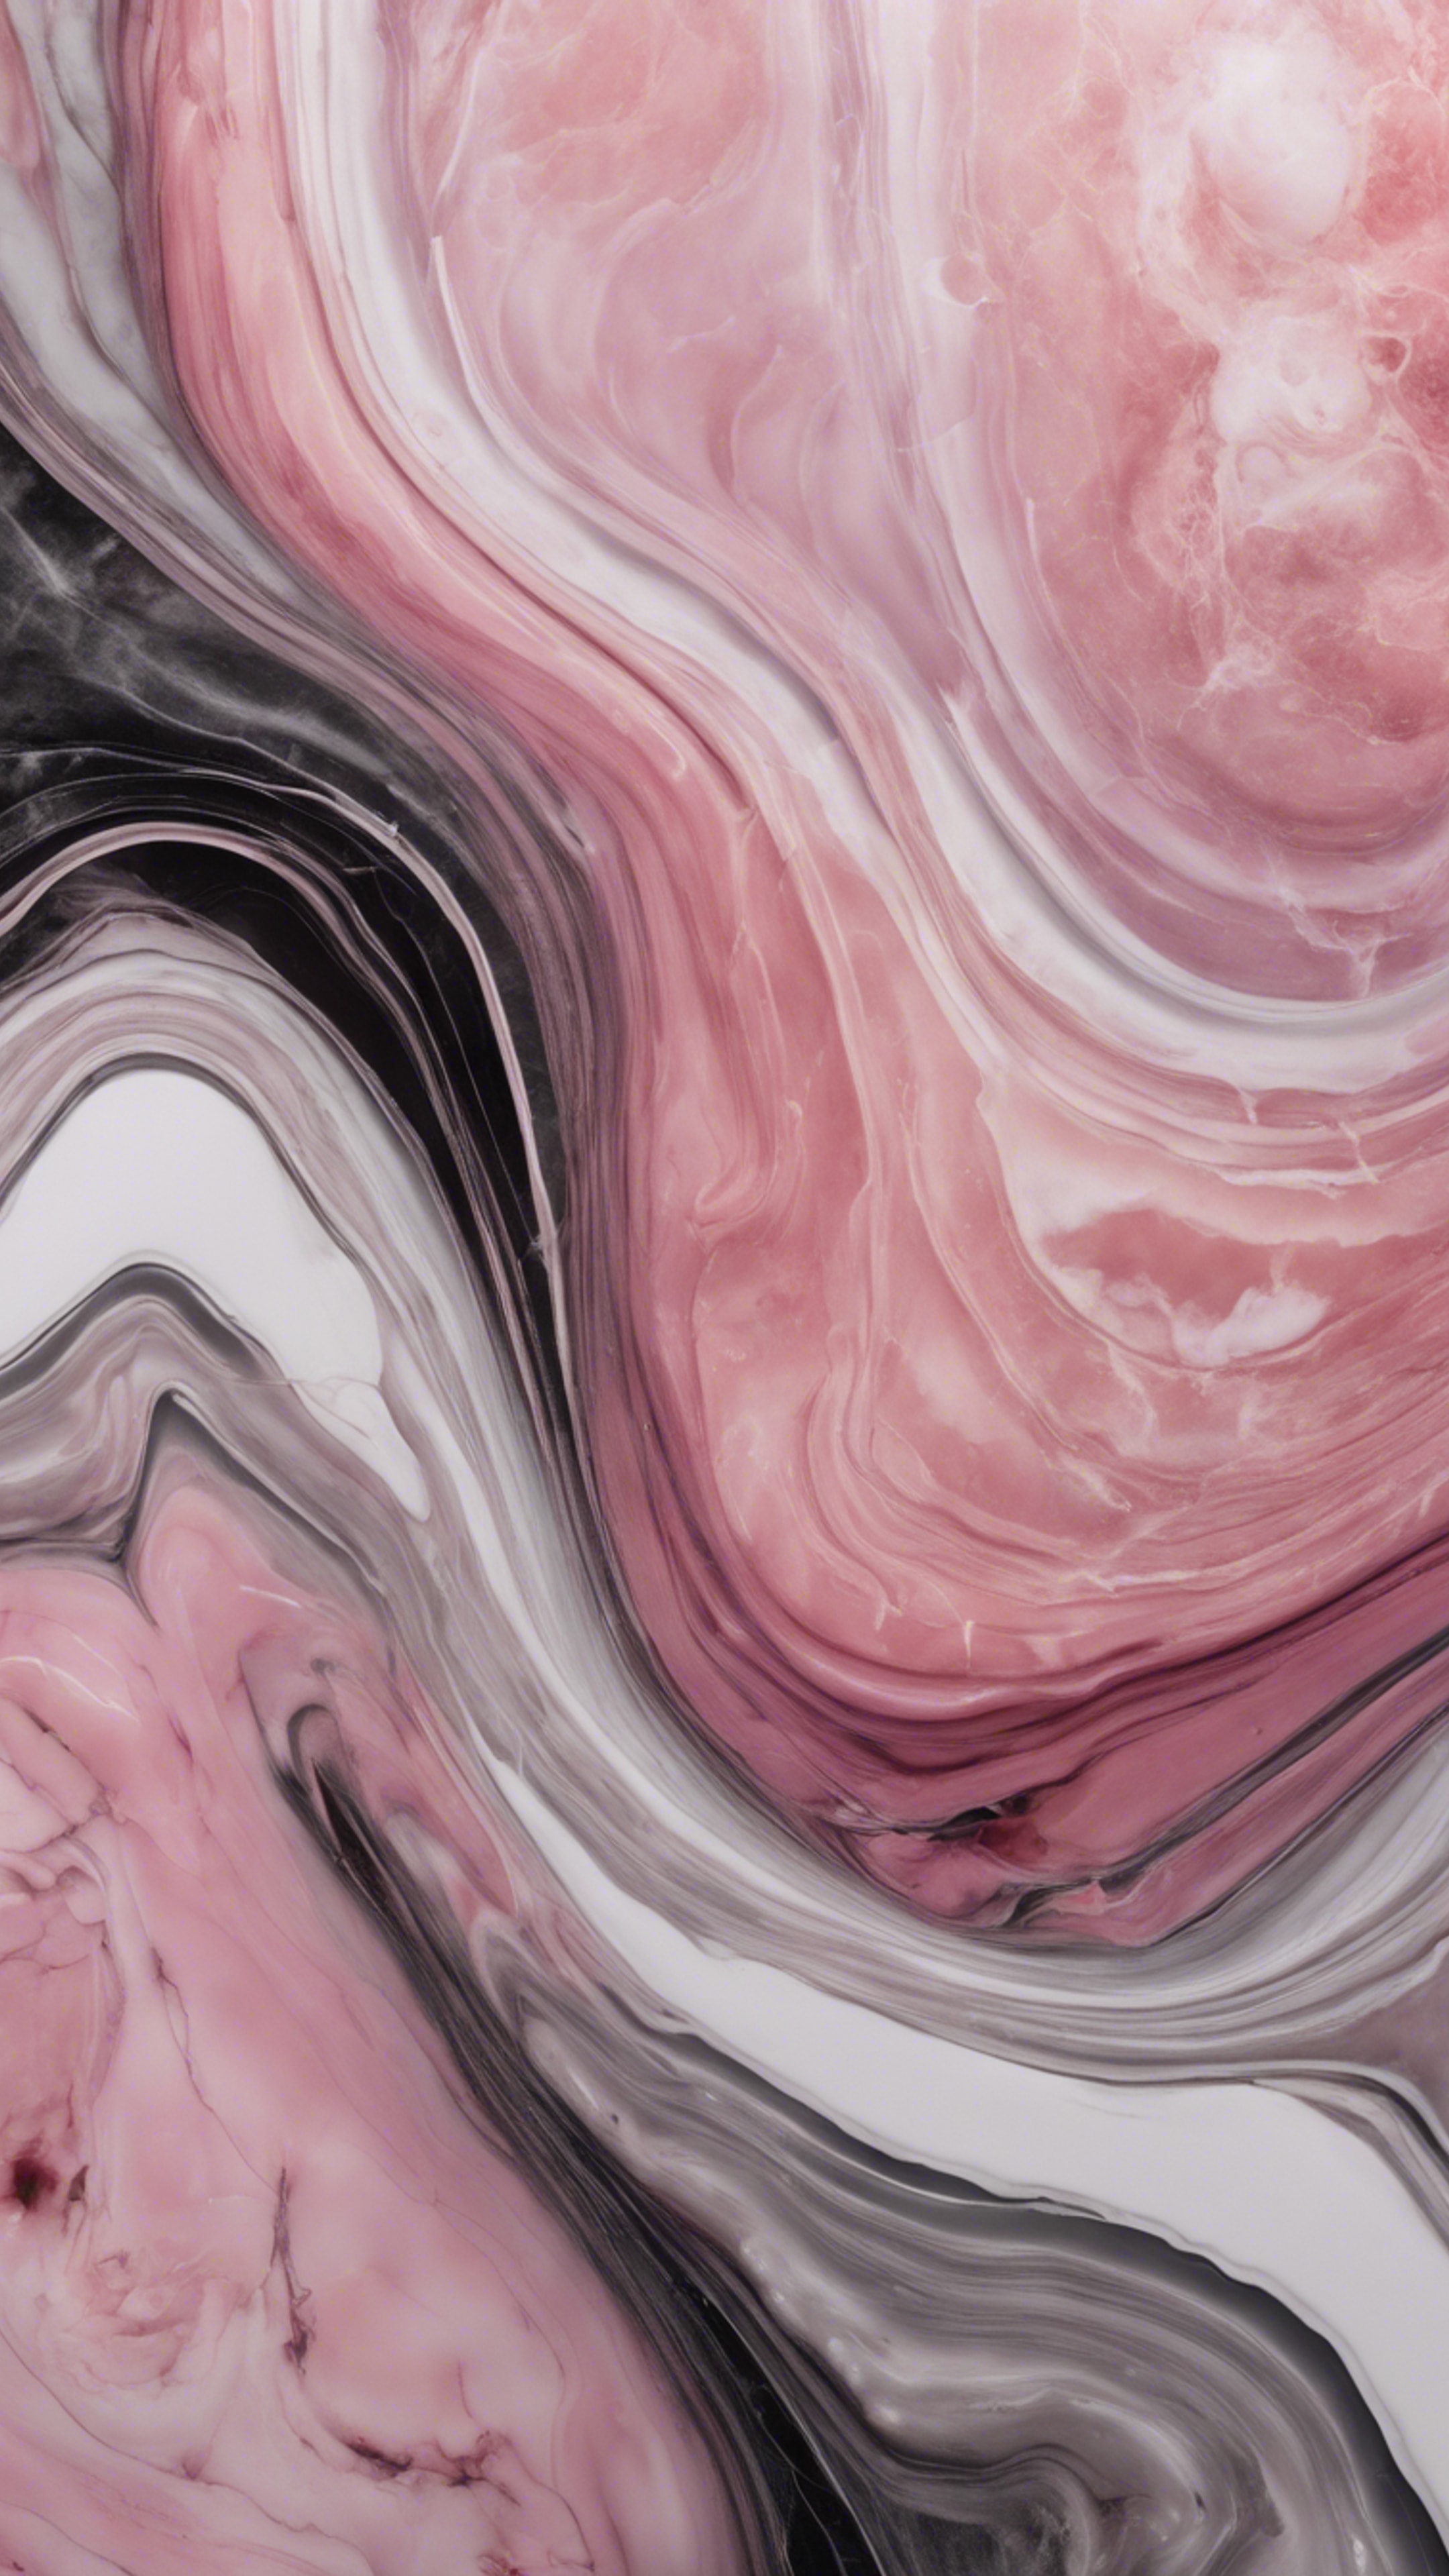 An abstract representation of pink marble, incorporating waves of deep pinks, soft whites, and dark greys. Tapet[5ac081f457bf4dc8ac1f]